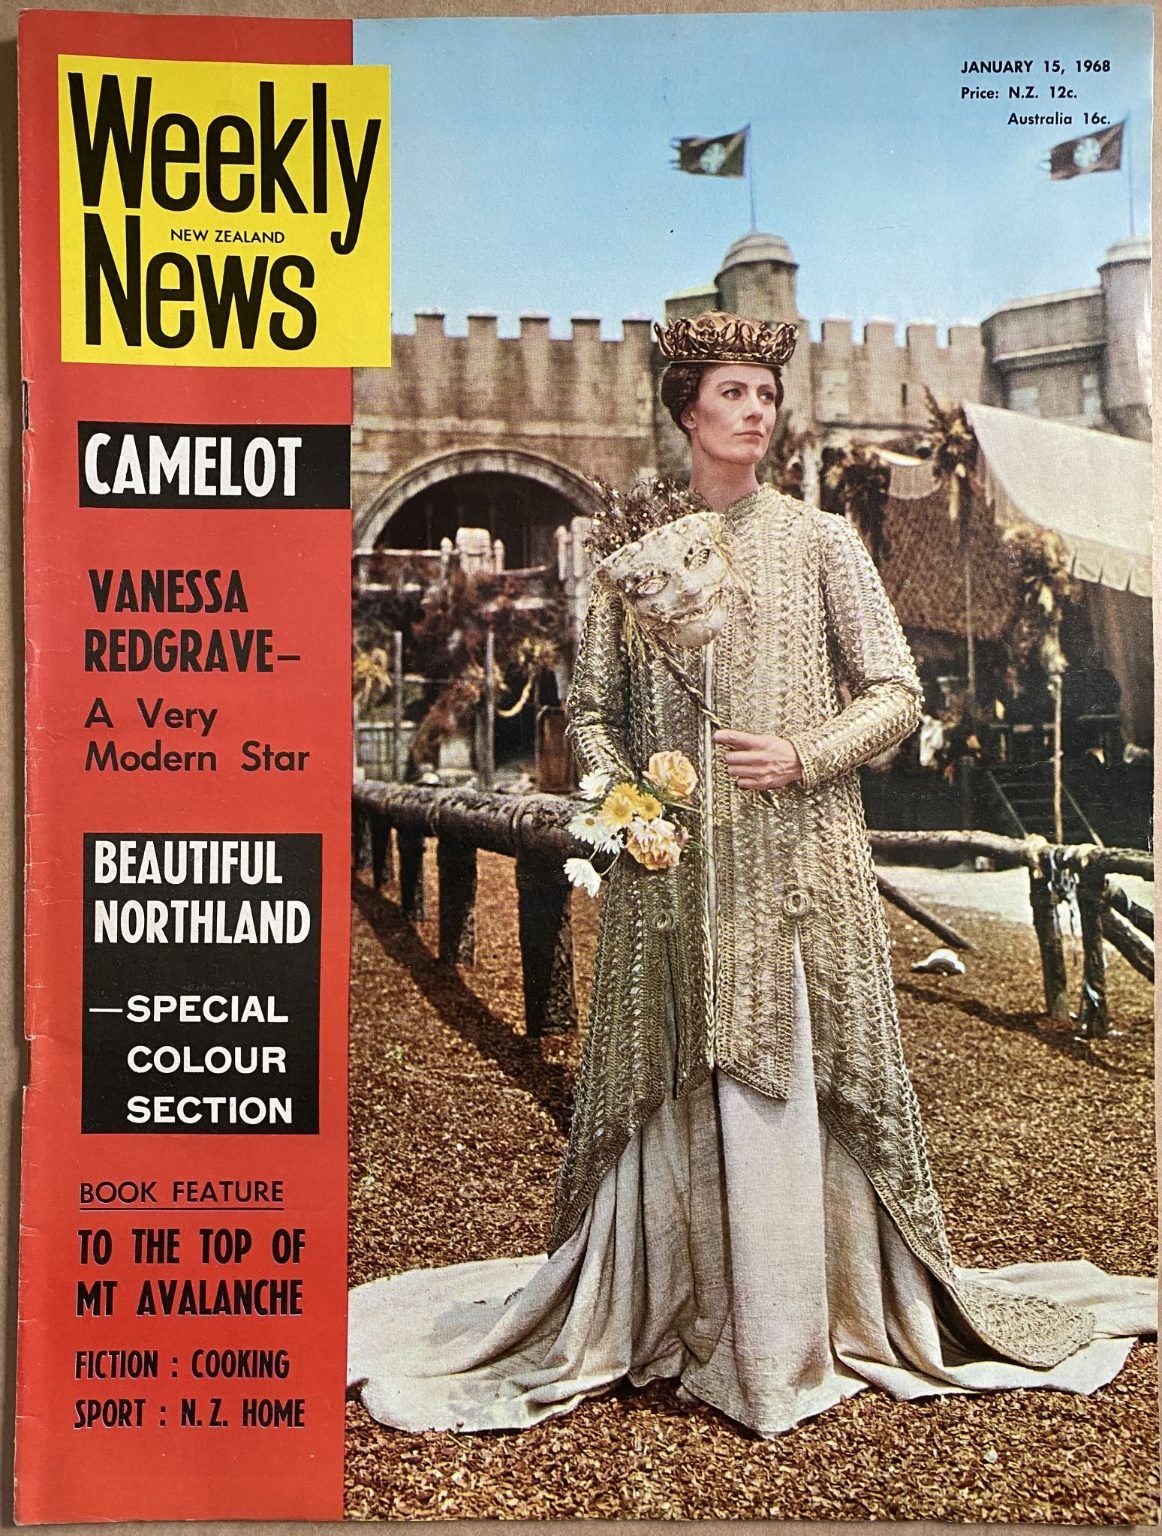 OLD NEWSPAPER: New Zealand Weekly News, No. 5433, 15 January 1968